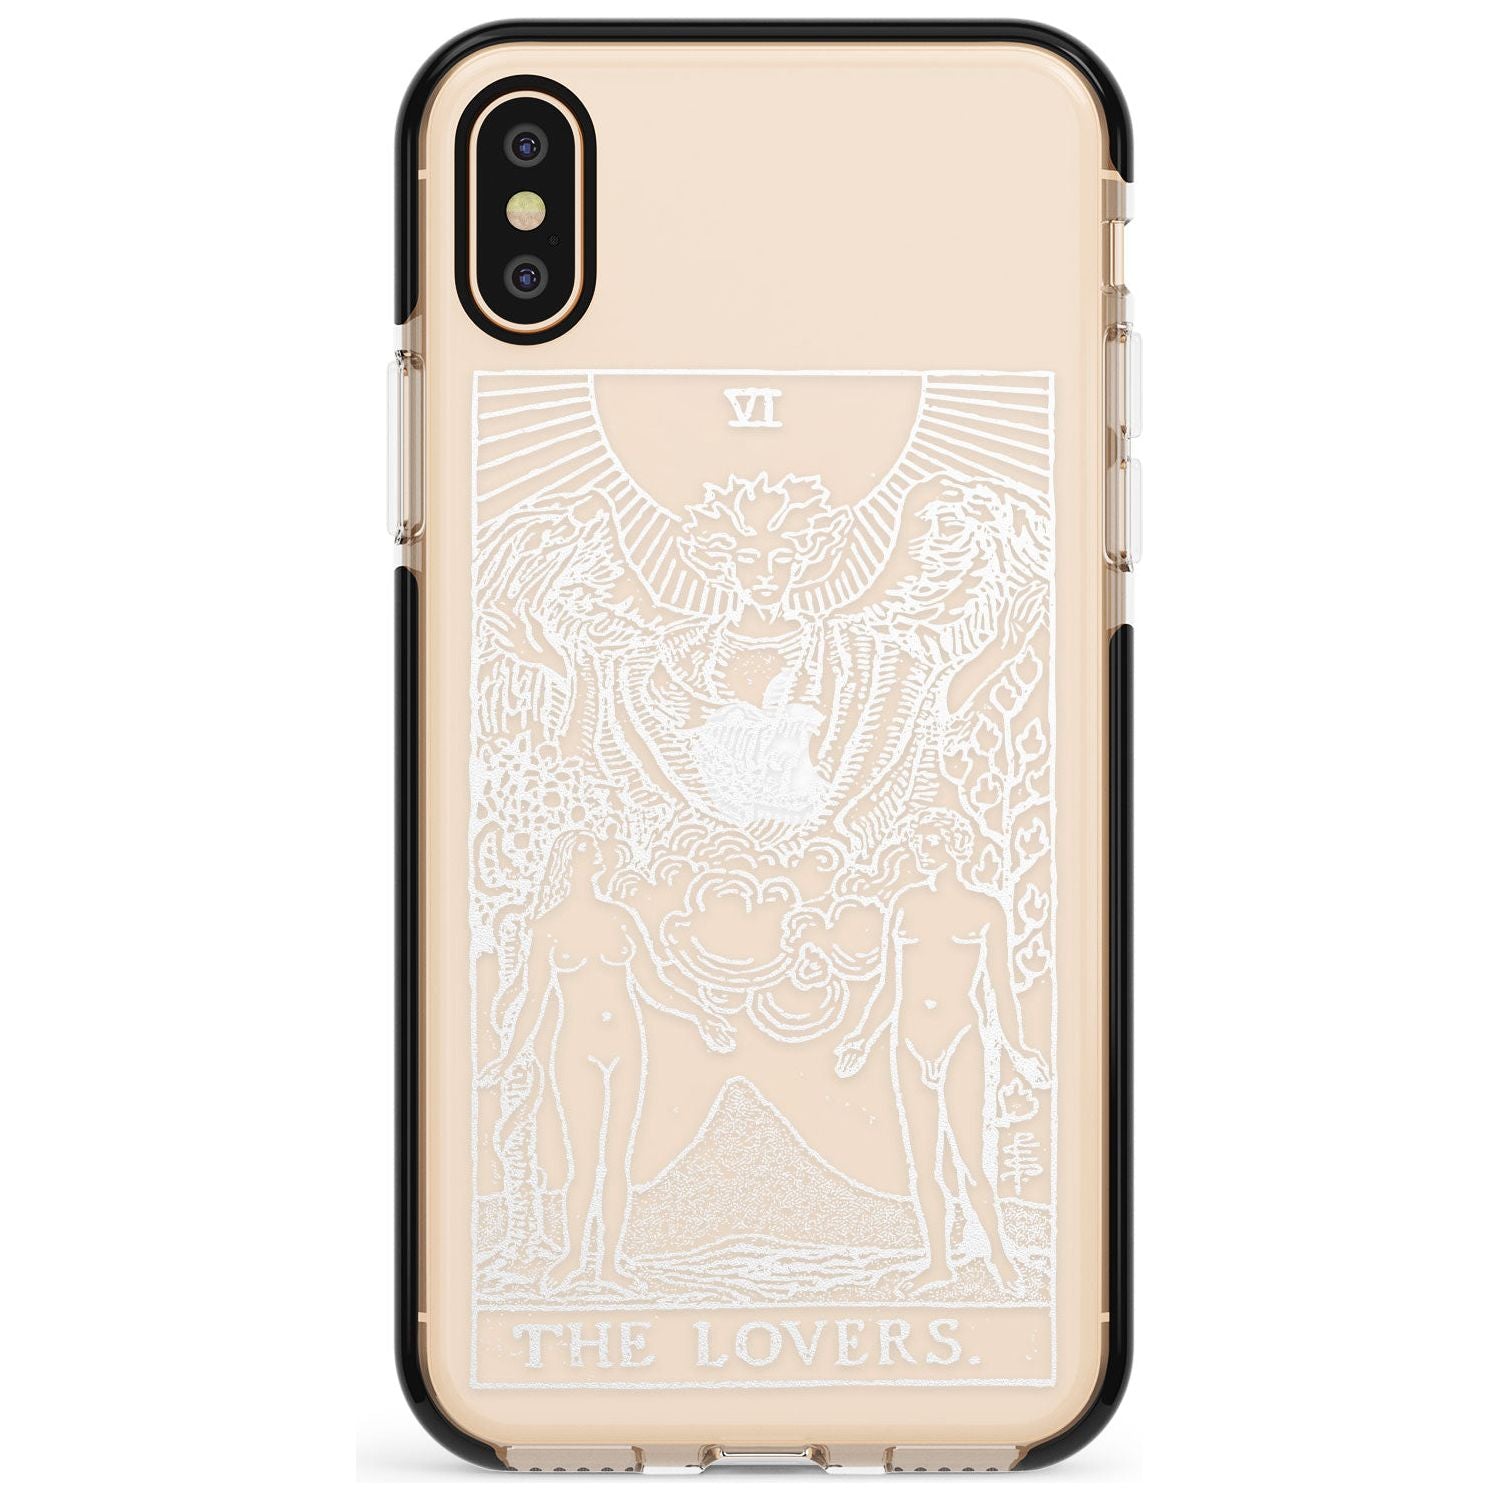 The Lovers Tarot Card - White Transparent Pink Fade Impact Phone Case for iPhone X XS Max XR